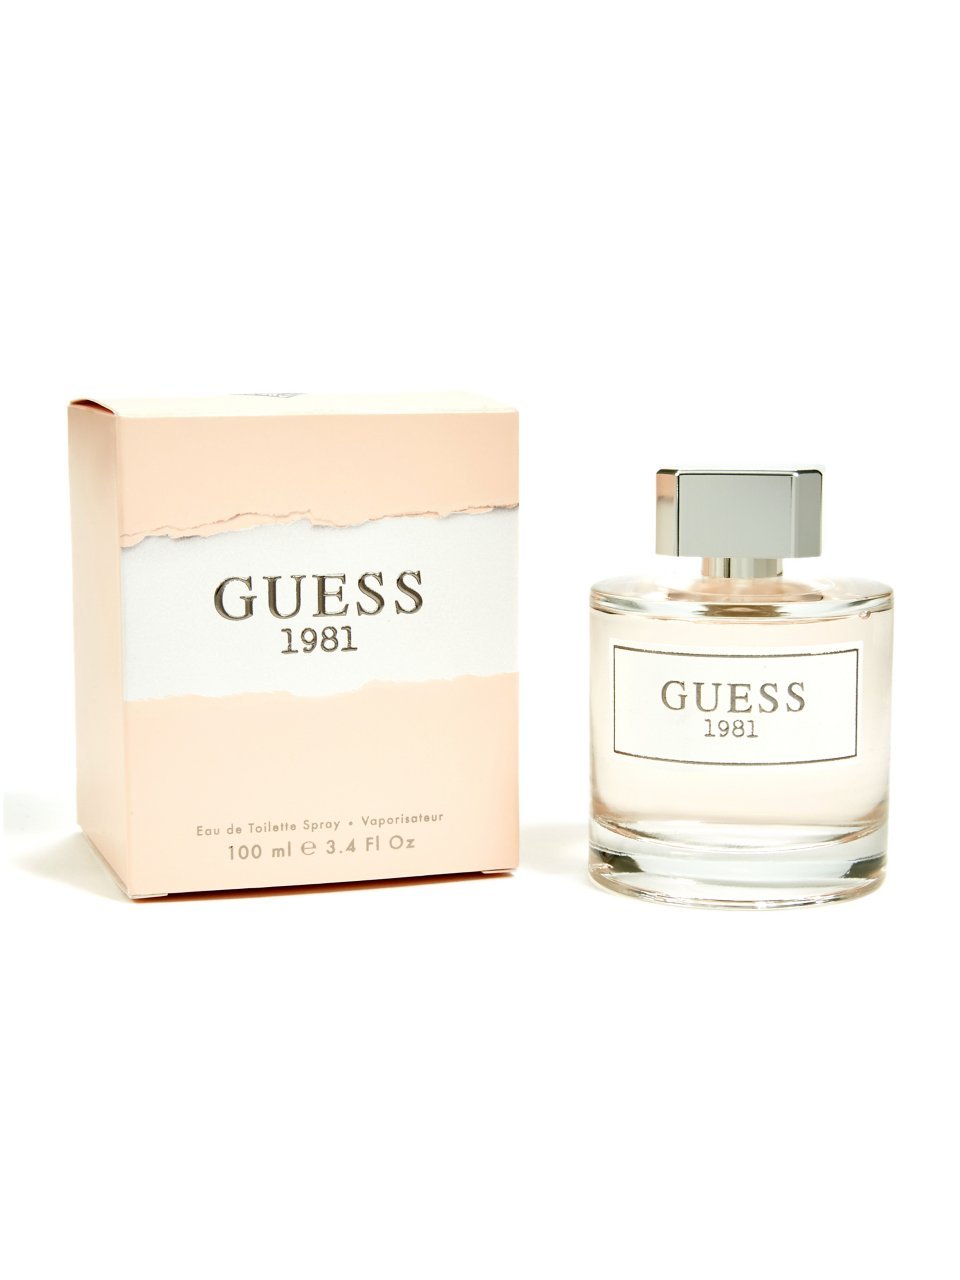 Guess 1981 Perfume For Women 34 Oz Edt Spray New In Box Ebay